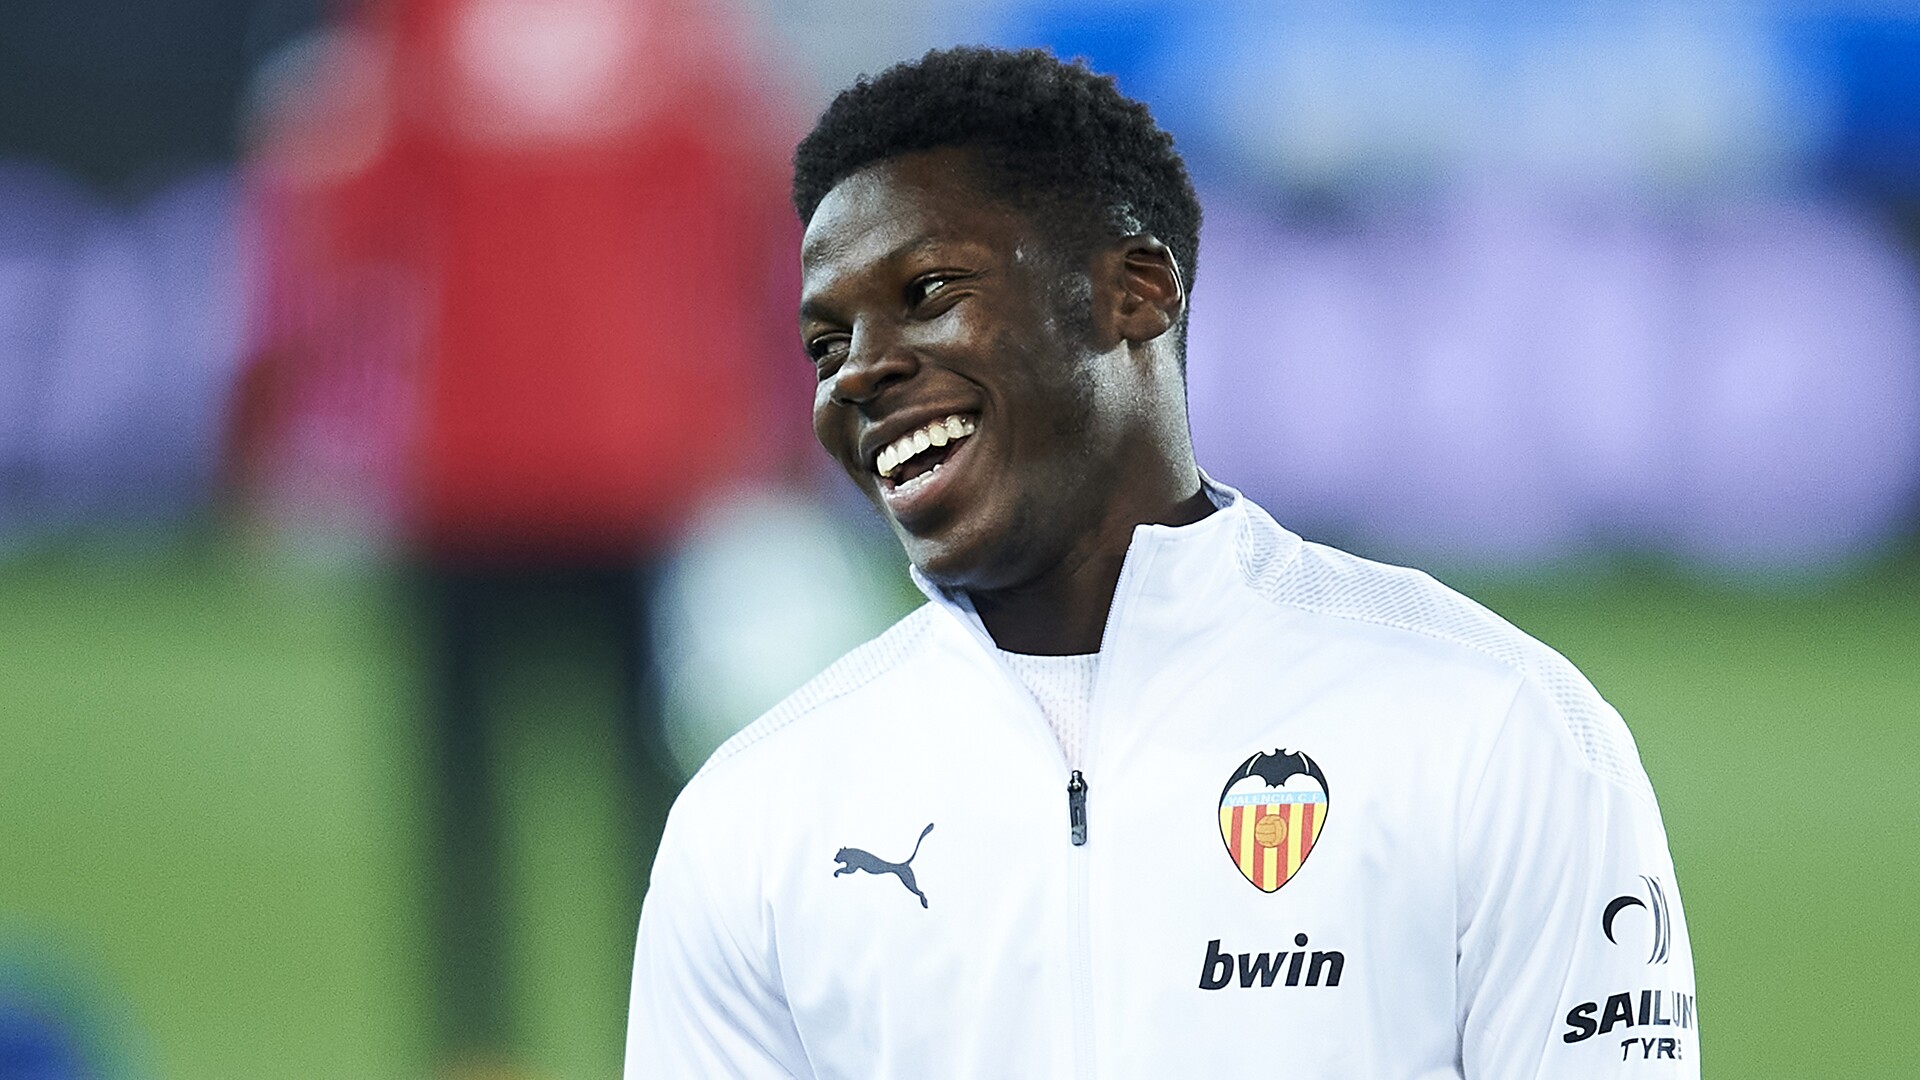 Milan will soon welcome Tijjani Reijnders, but they won’t stop there in the midfield, as they have scheduled new talks with Valencia for Yunus Musah.